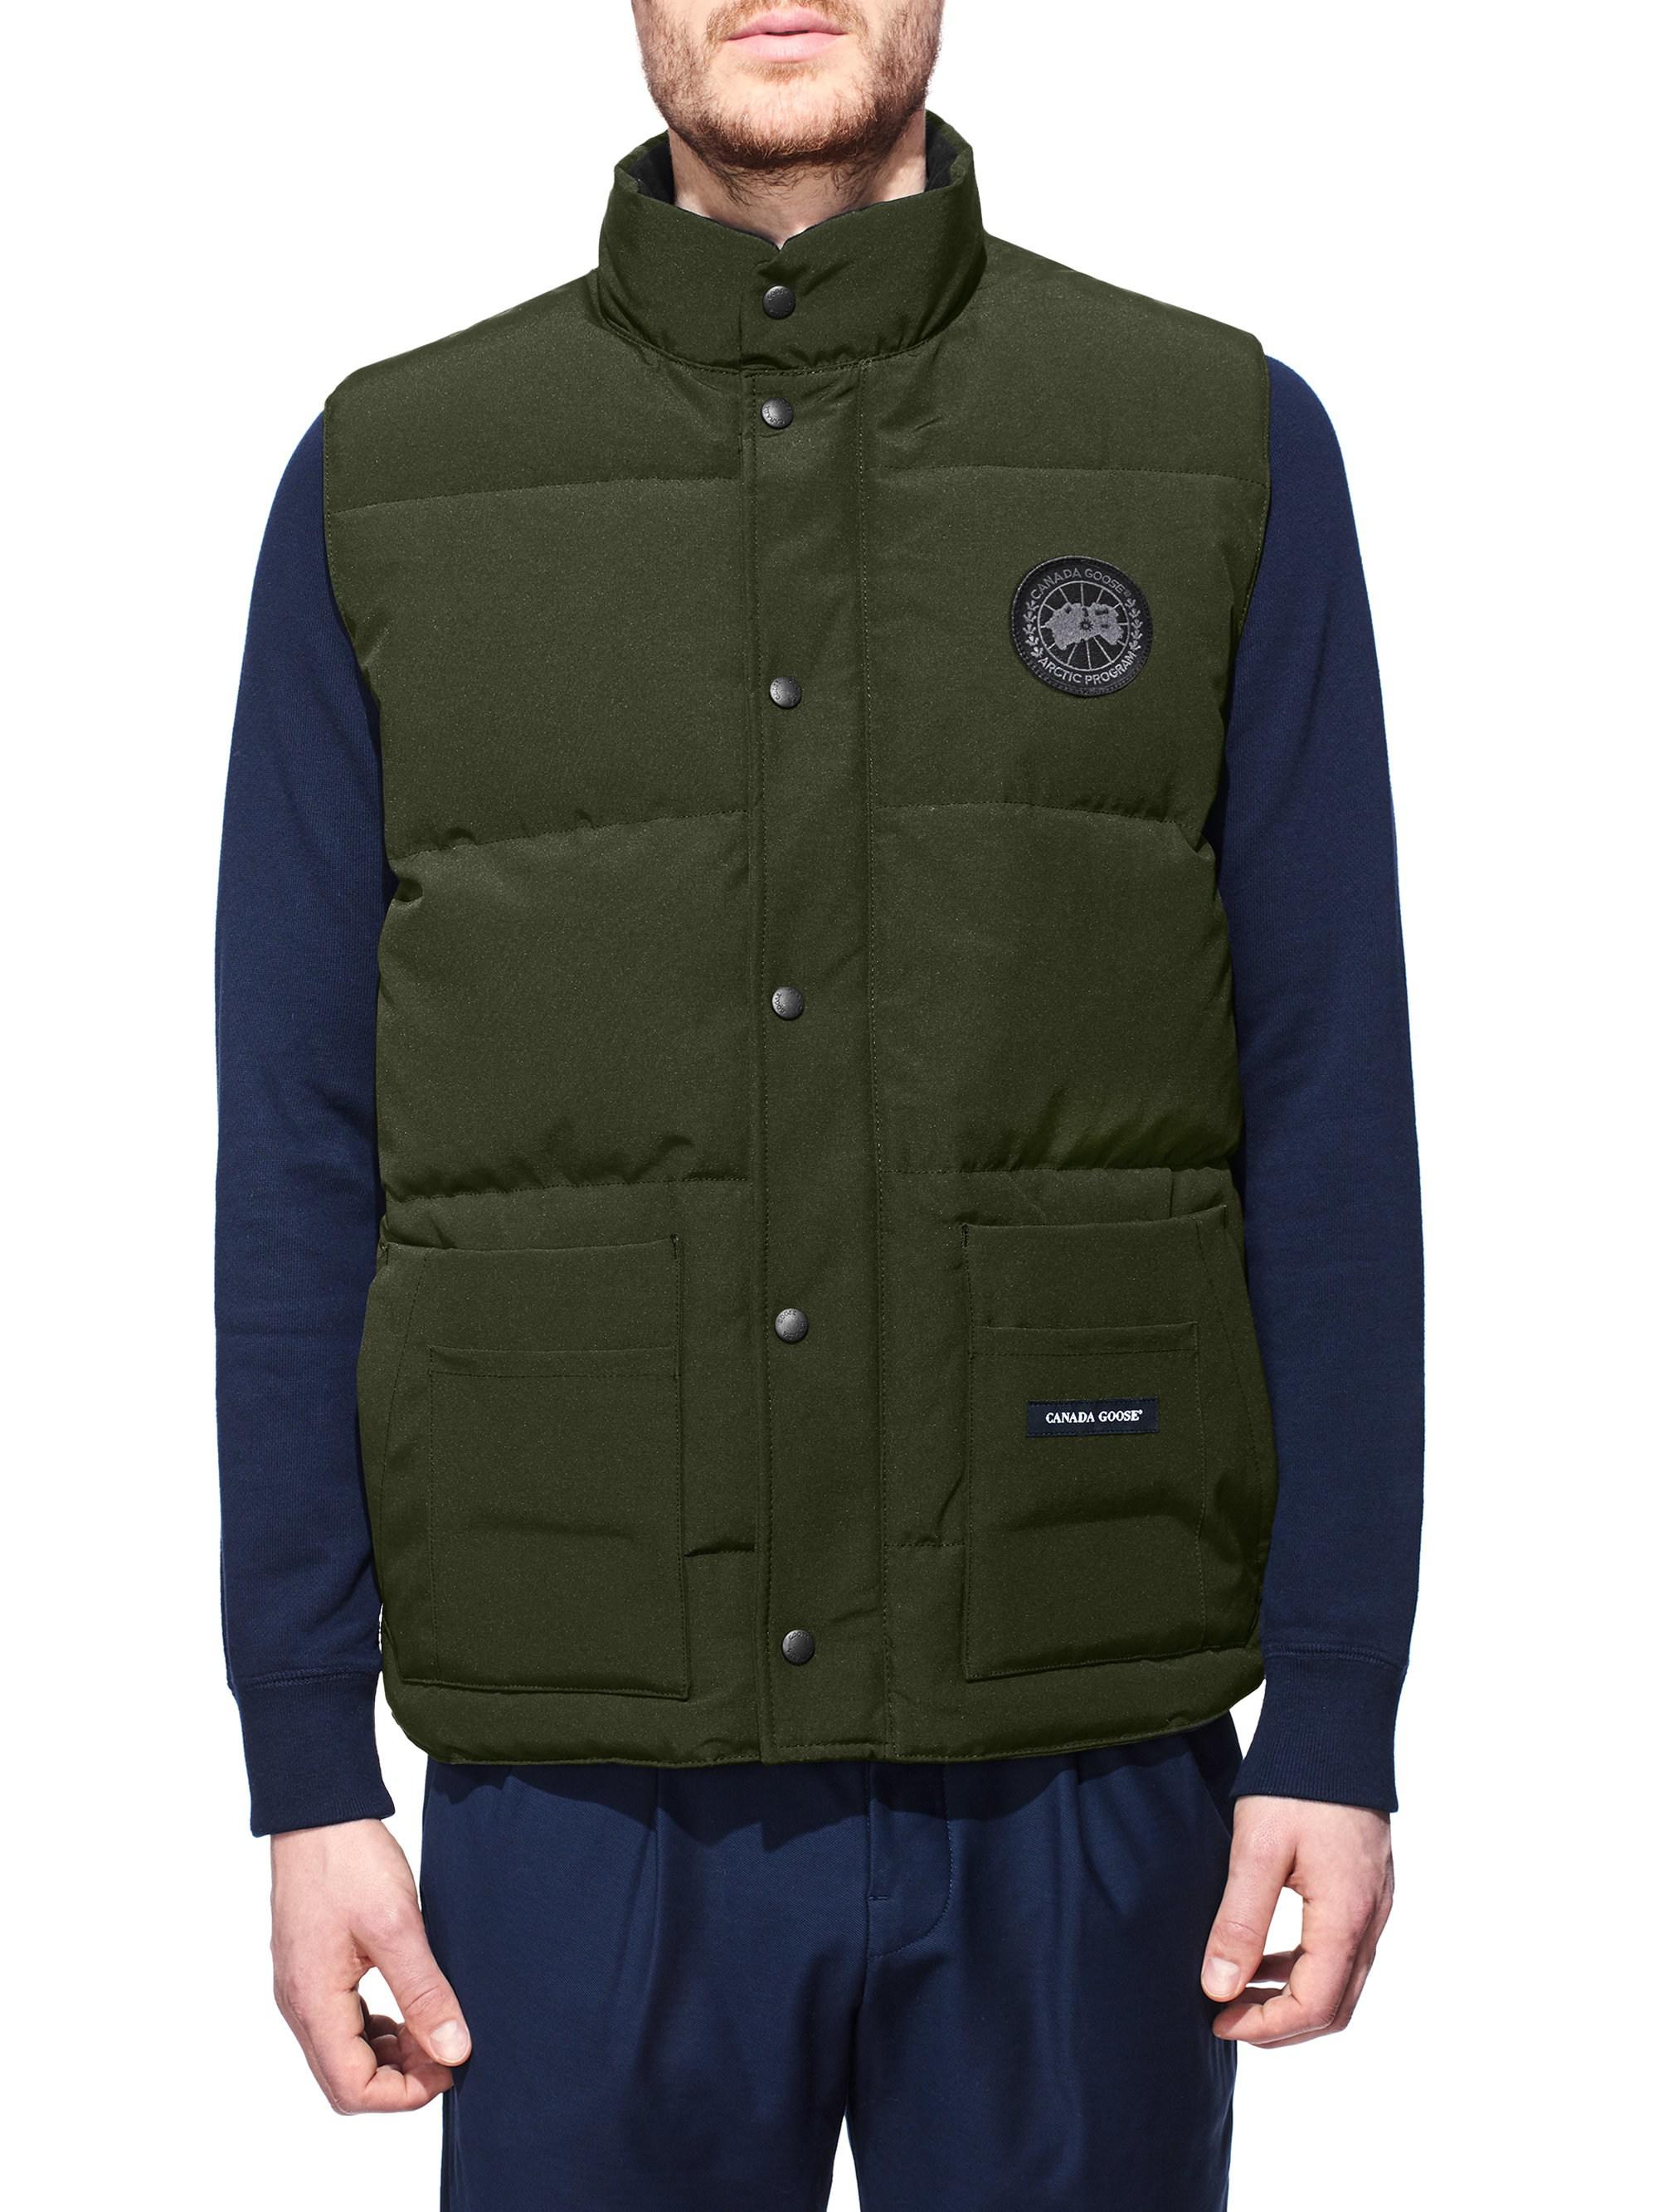 Canada Goose Synthetic Freestyle Military Down Vest Black Label in Military  Green (Green) for Men - Lyst